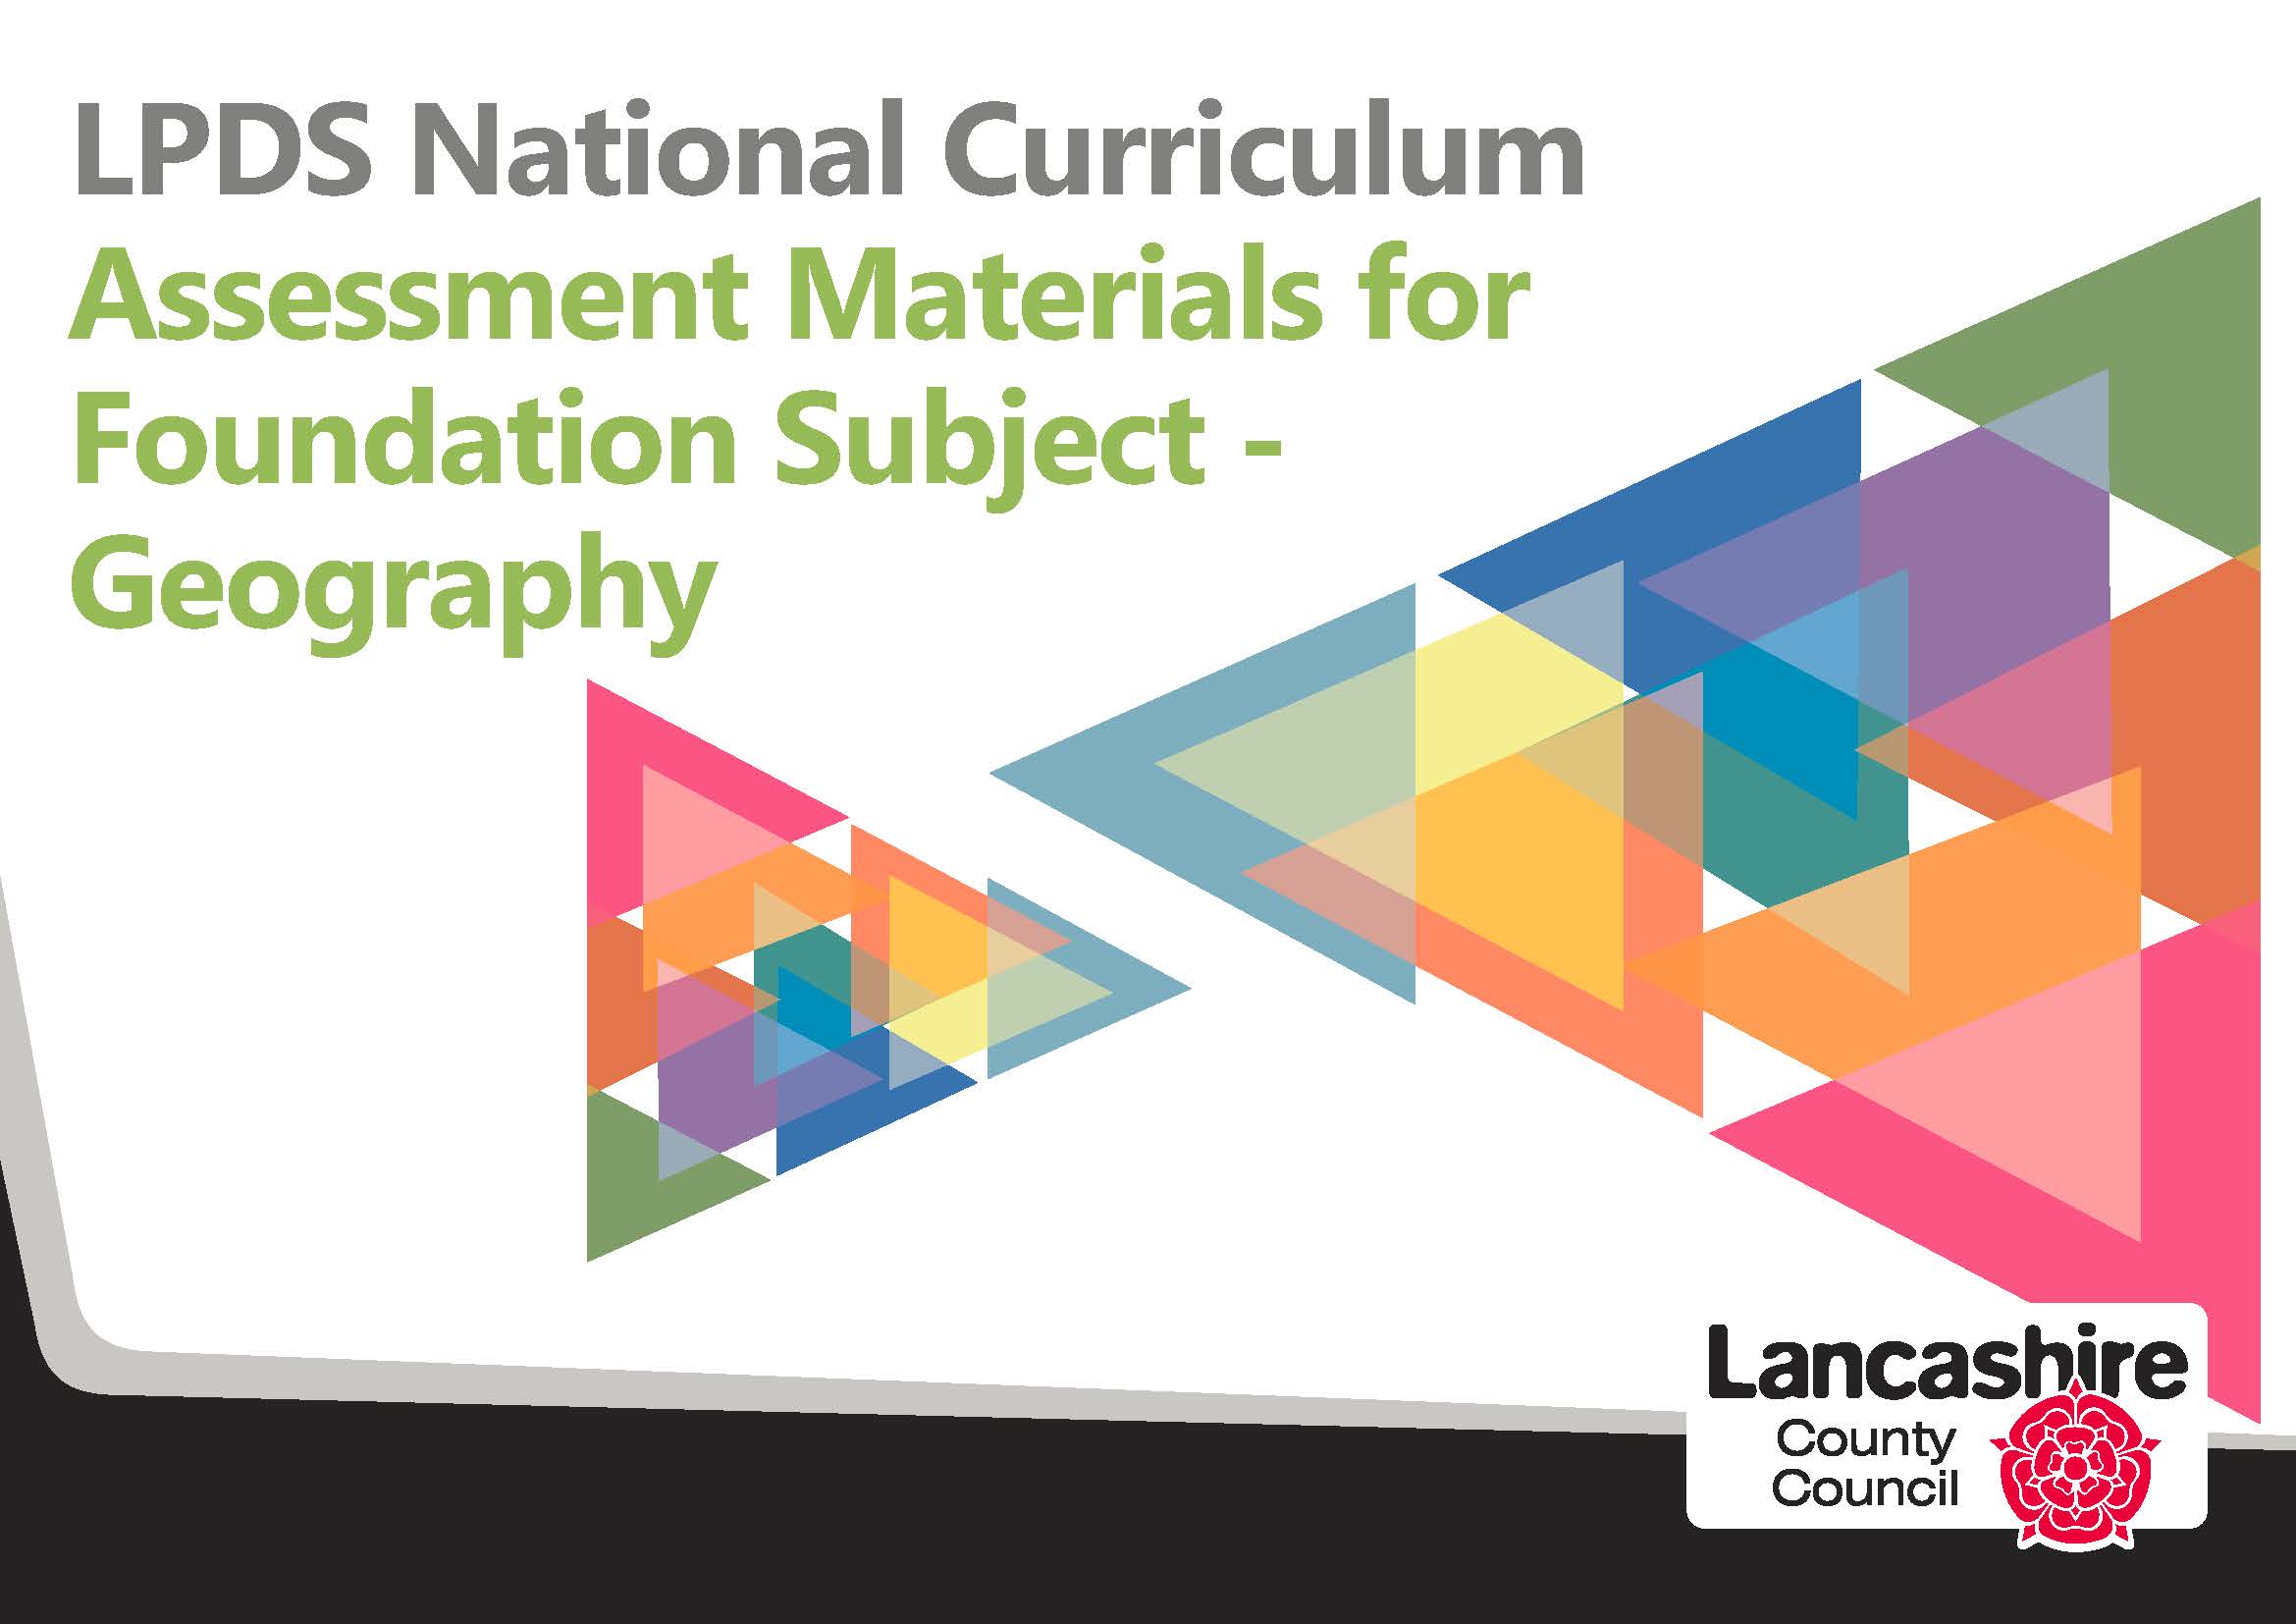 LPDS National Curriculum Assessment Materials - Foundation Subjects - Geography Assessment